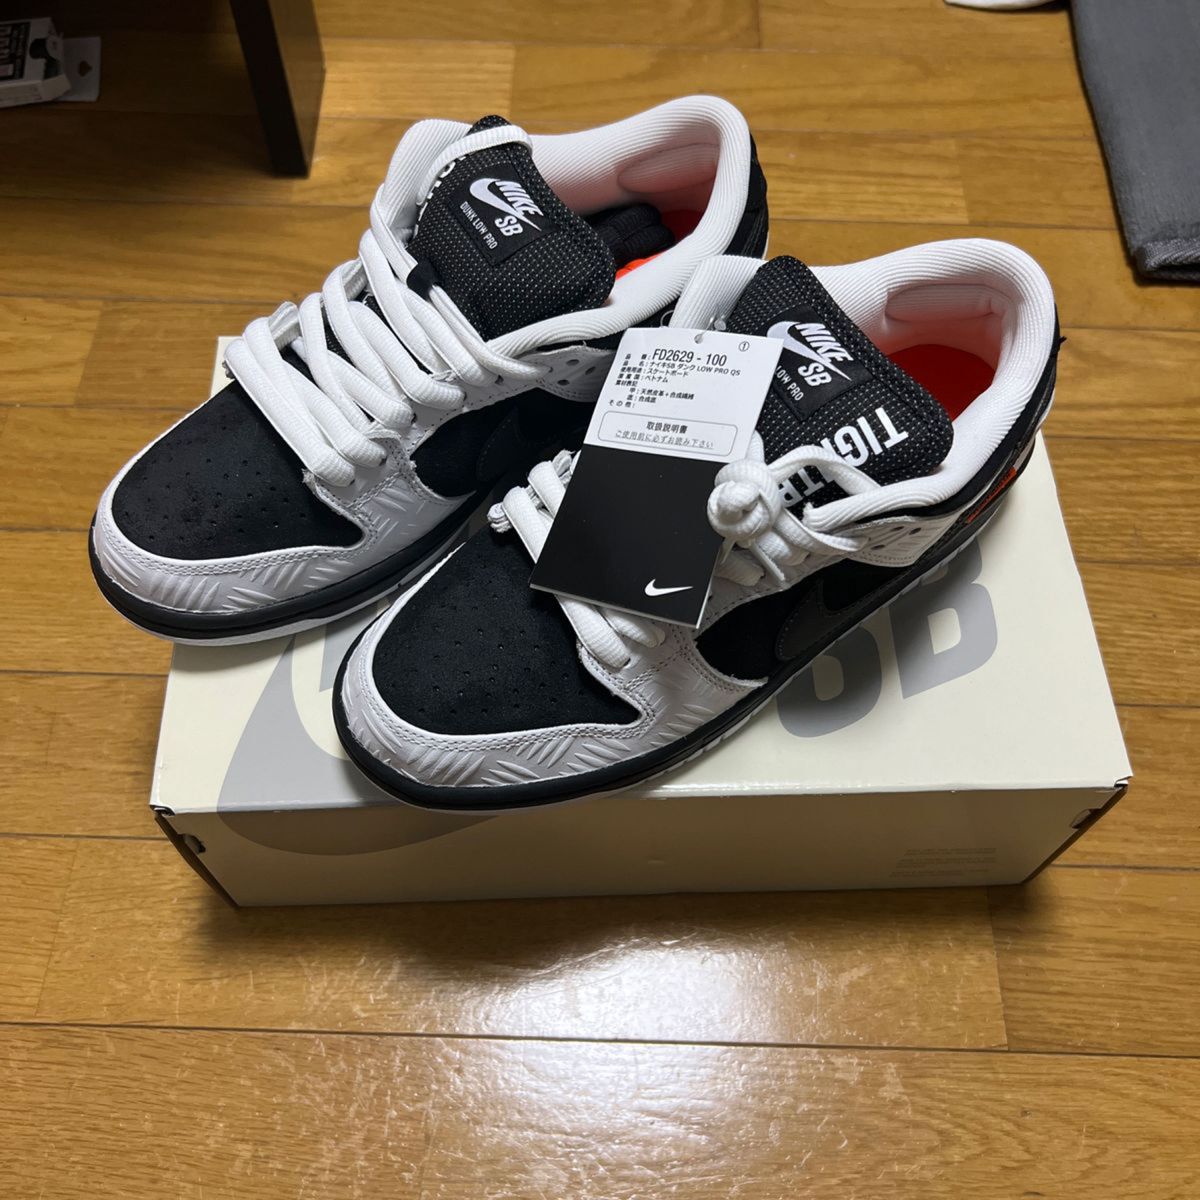 TIGHTBOOTH × SB DUNK LOW PRO "BLACK AND WHITE" FD2629-100 